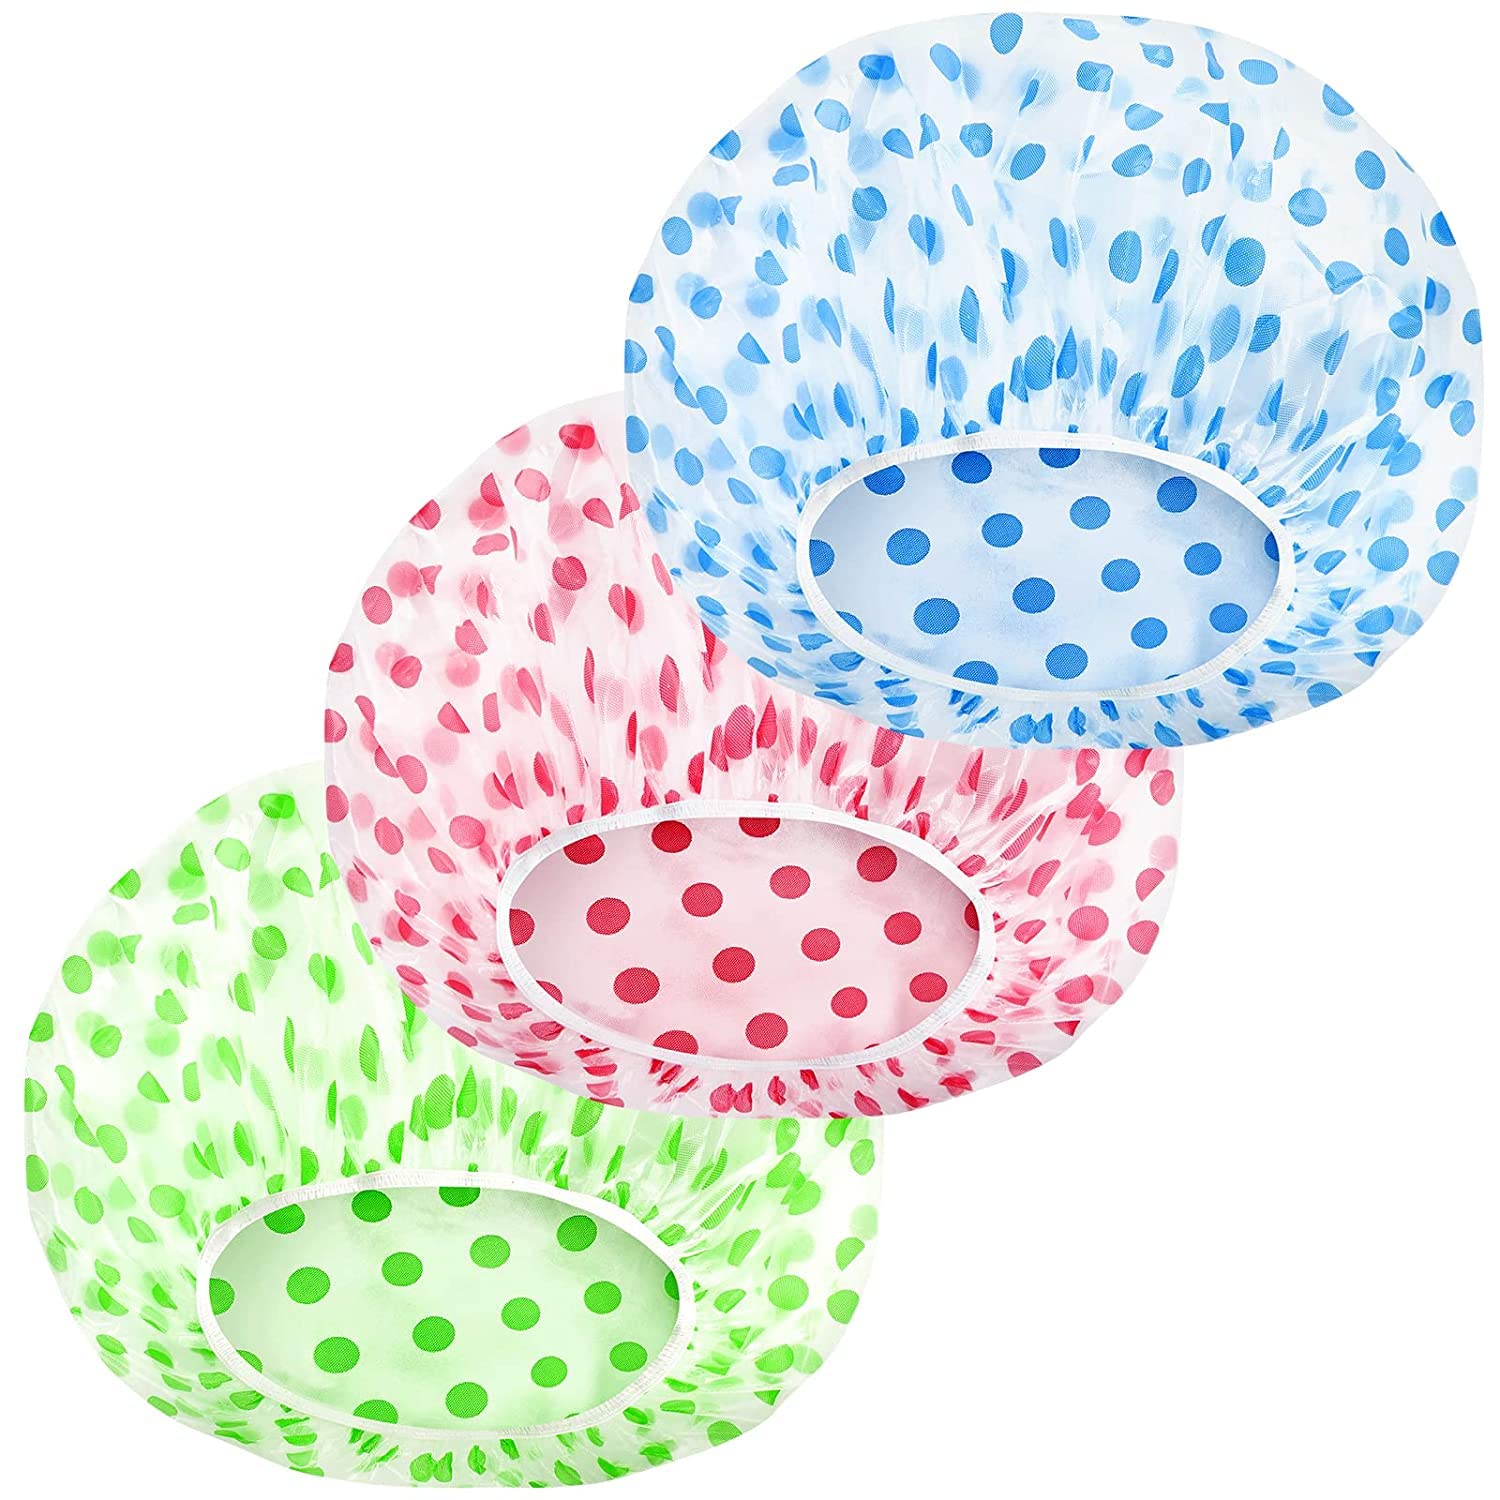 MZD8391 Shower Cap, Reusable Shower Hat Bath Caps - Waterproof with Elastic Band Hair Hat for Men Women Ladies Spa Salon (Coloful Dotted) (3 Packs)